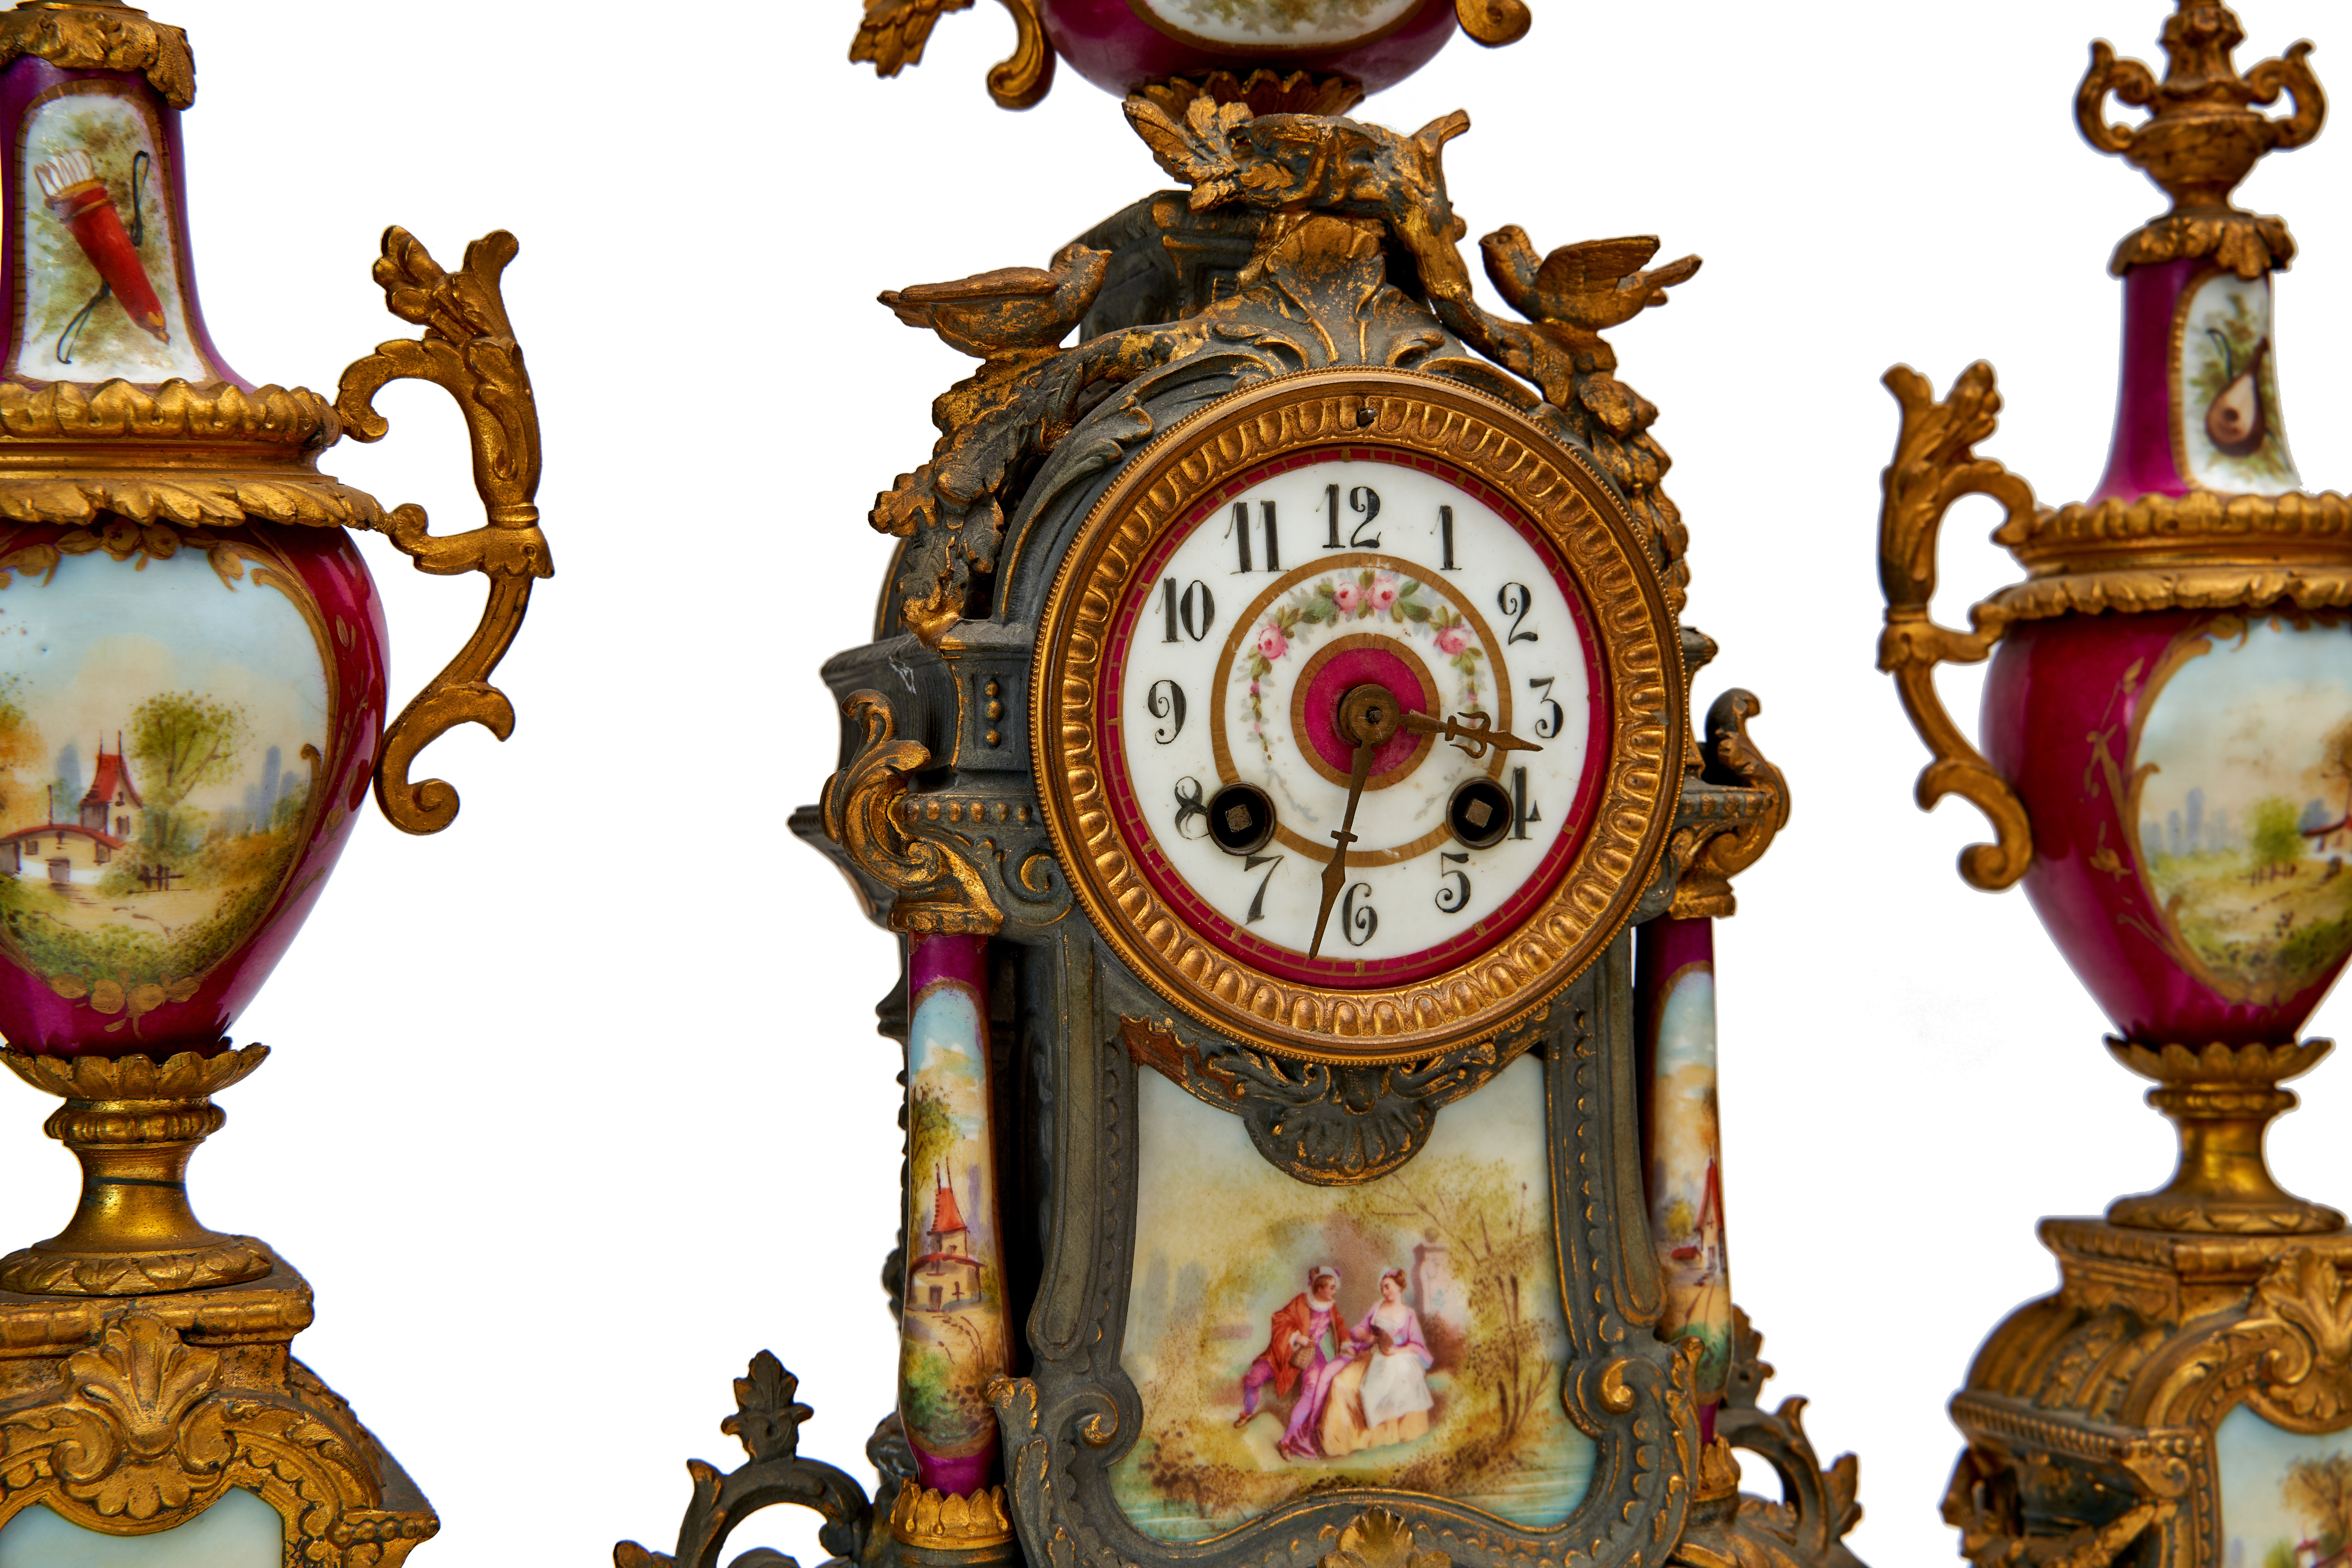 A PORCELAIN & BRONZE MOUNTED CLOCK GARNITURE, FRANCE, PROBABLY 19TH CENTURY - Image 2 of 4